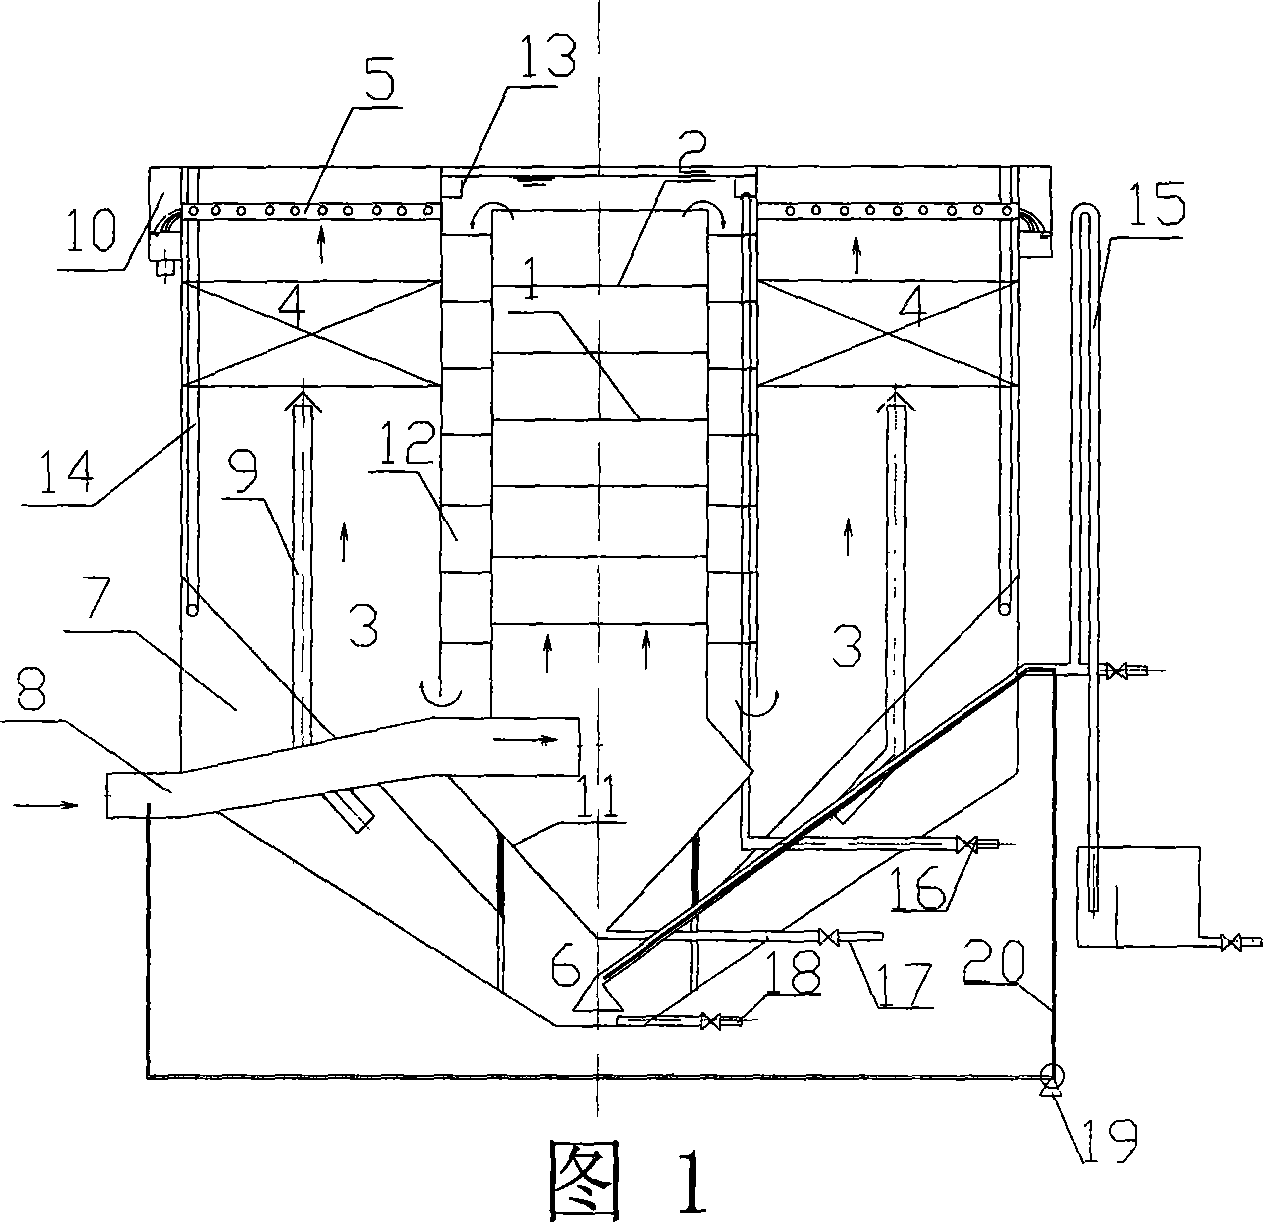 Apparatus and process for clarifying water efficiently